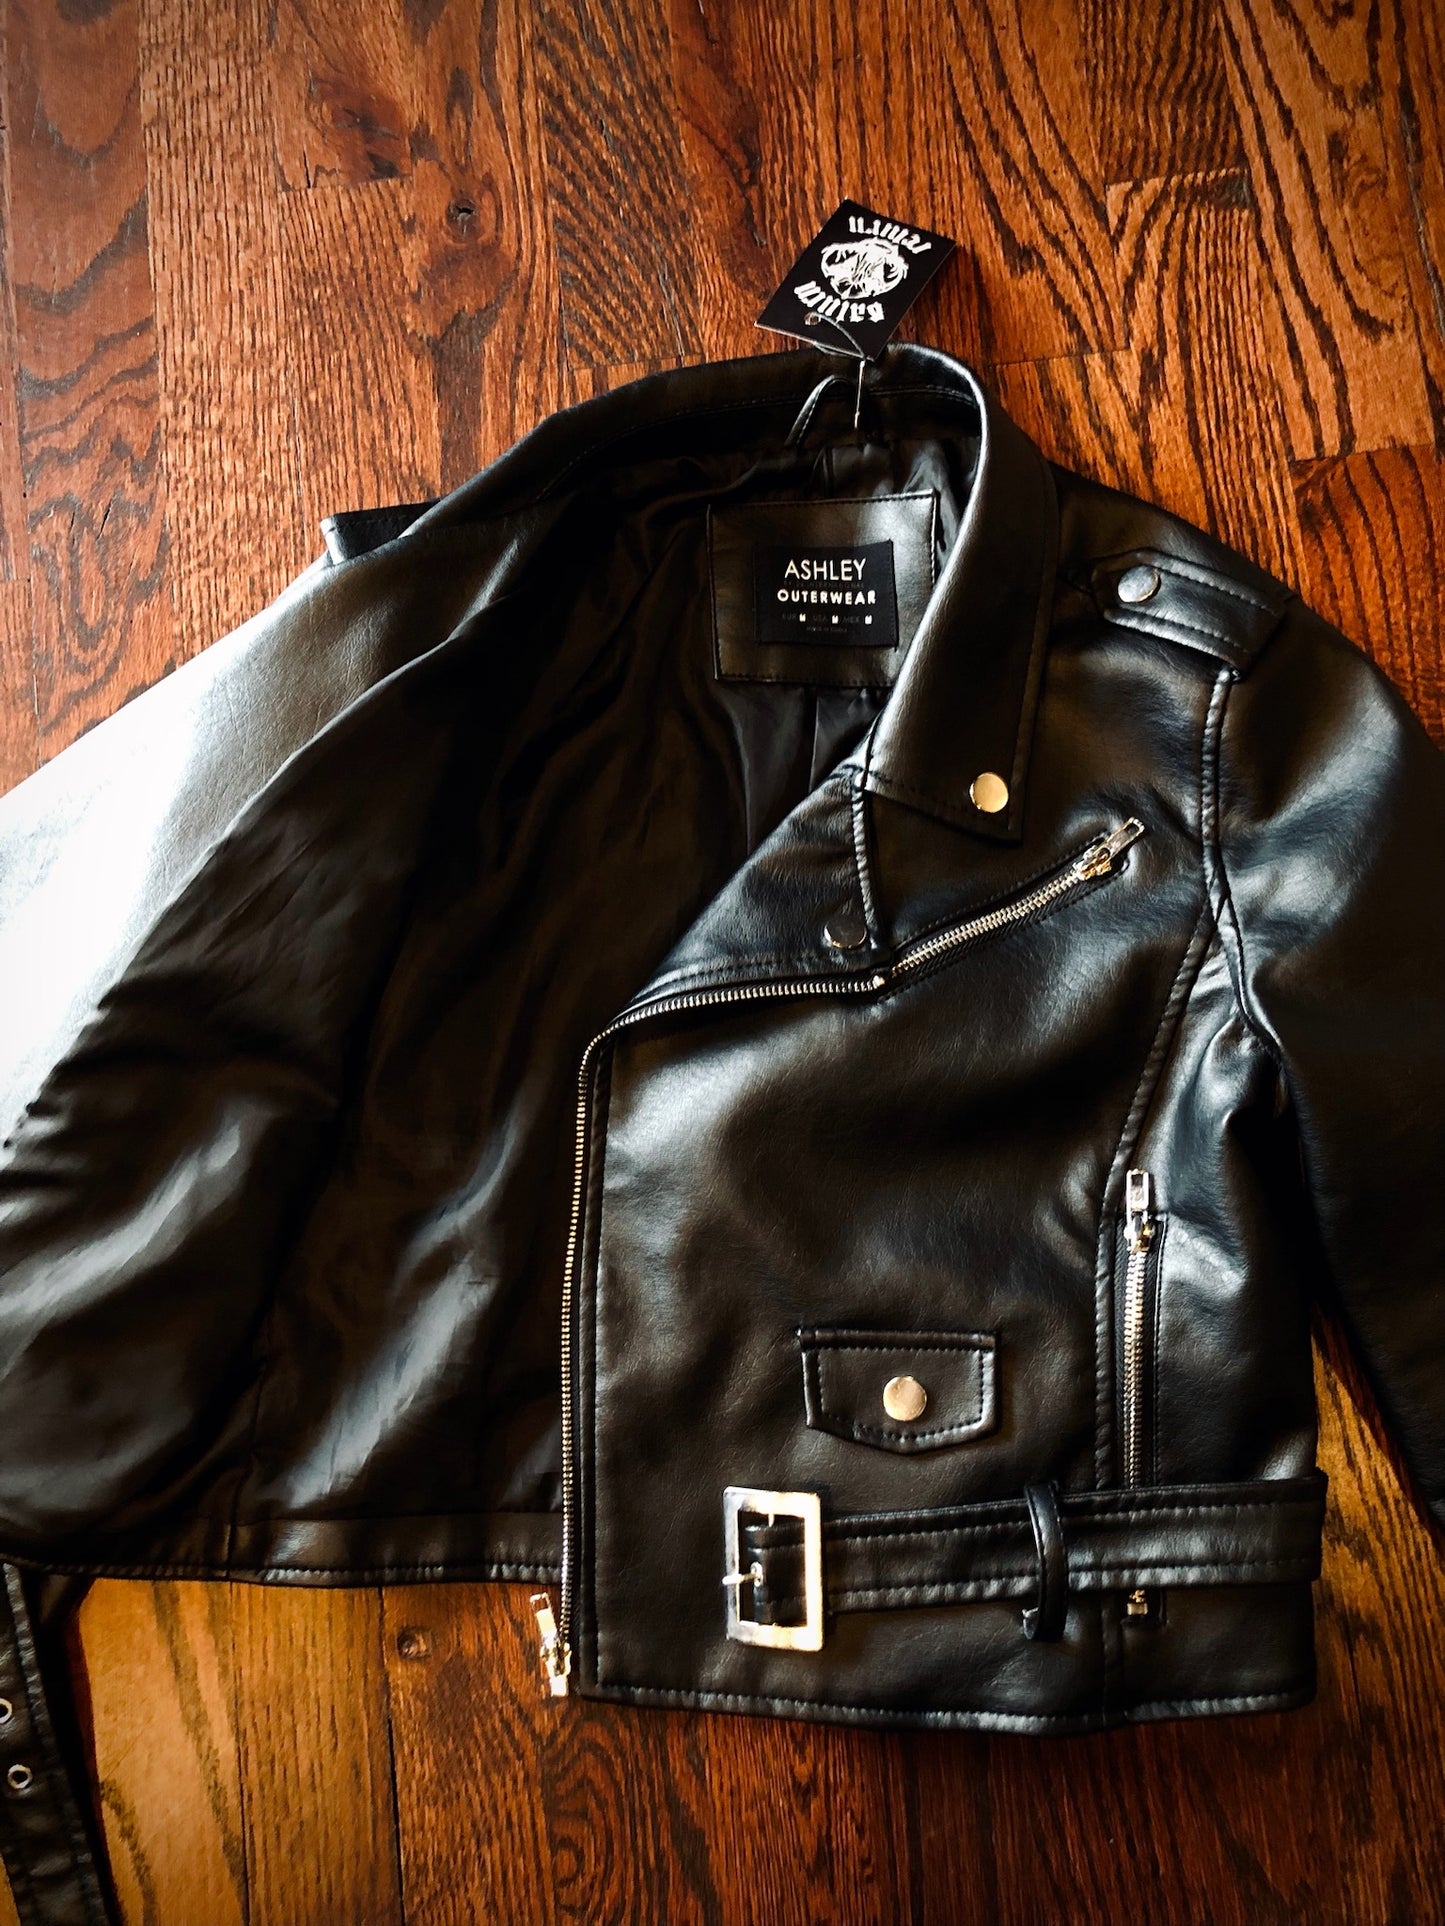 Ashley Outerwear Faux Leather Motorcycle Jacket Size M